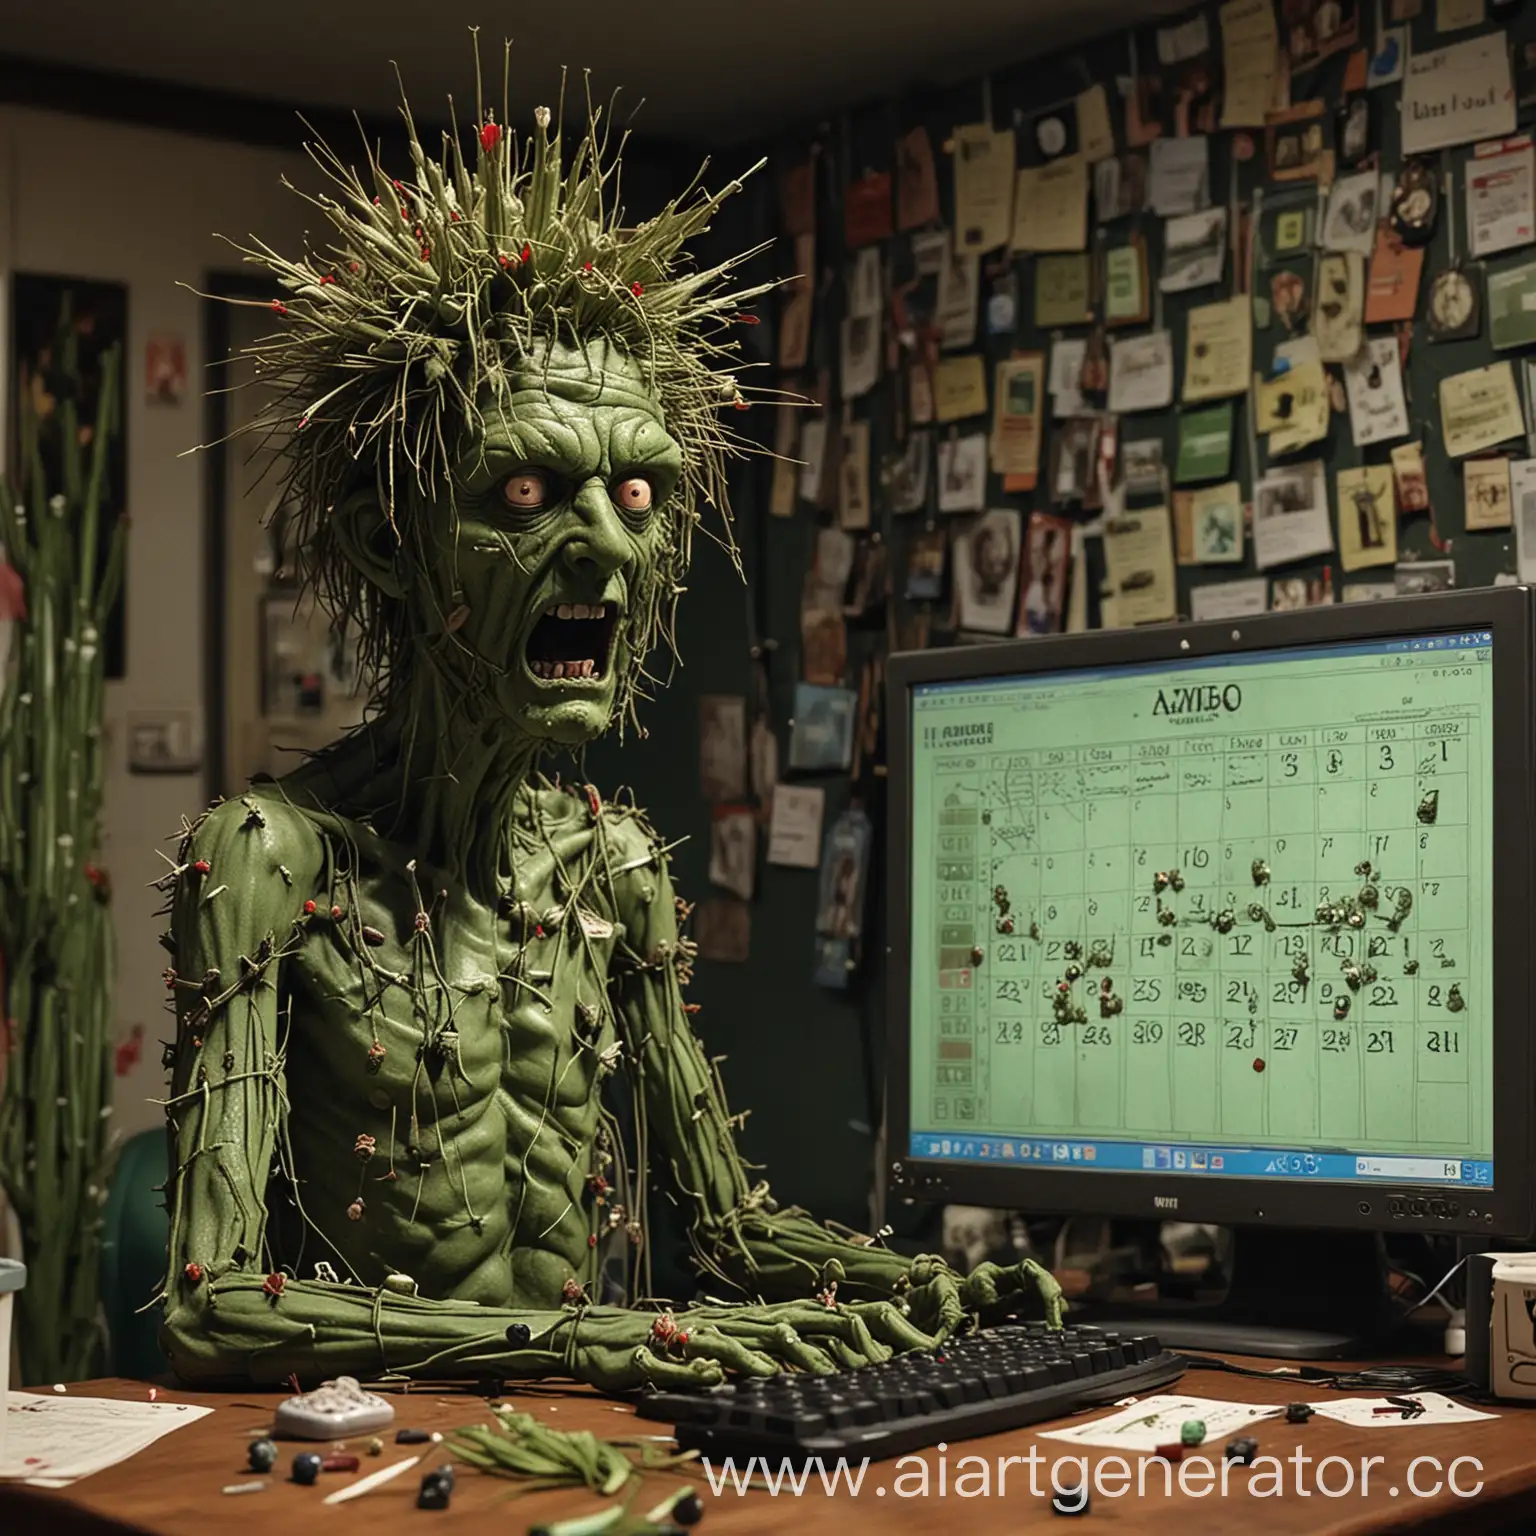 Surprised-Cactus-Man-Playing-Zombie-Video-Game-on-Computer